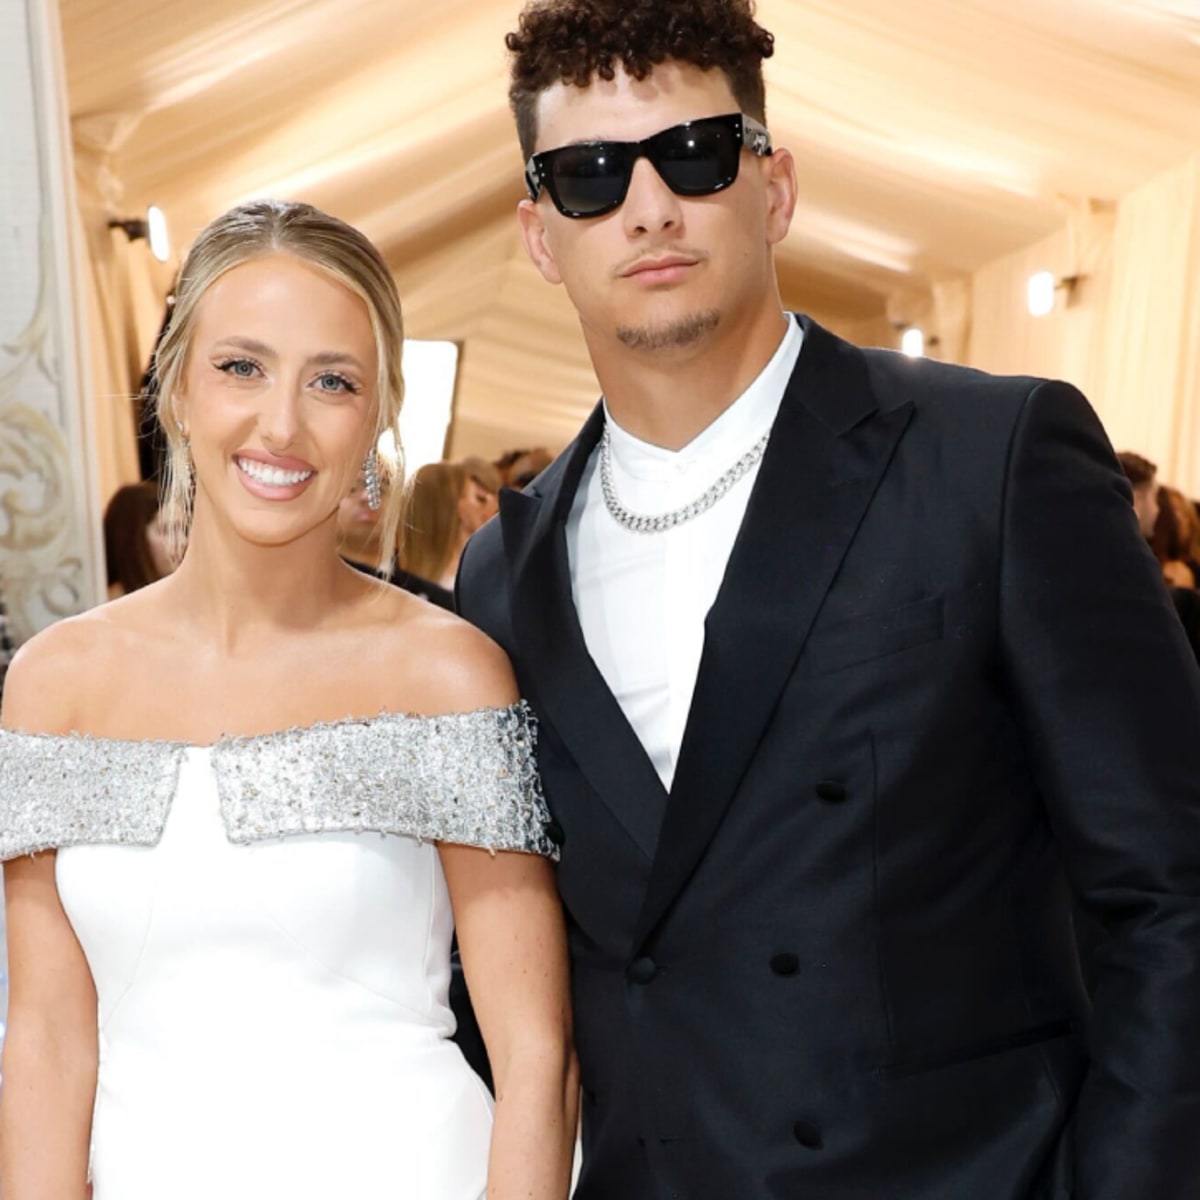 Met Gala Roundup: Here's What Patrick Mahomes, Other Superstar Athletes  Wore - Sports Illustrated